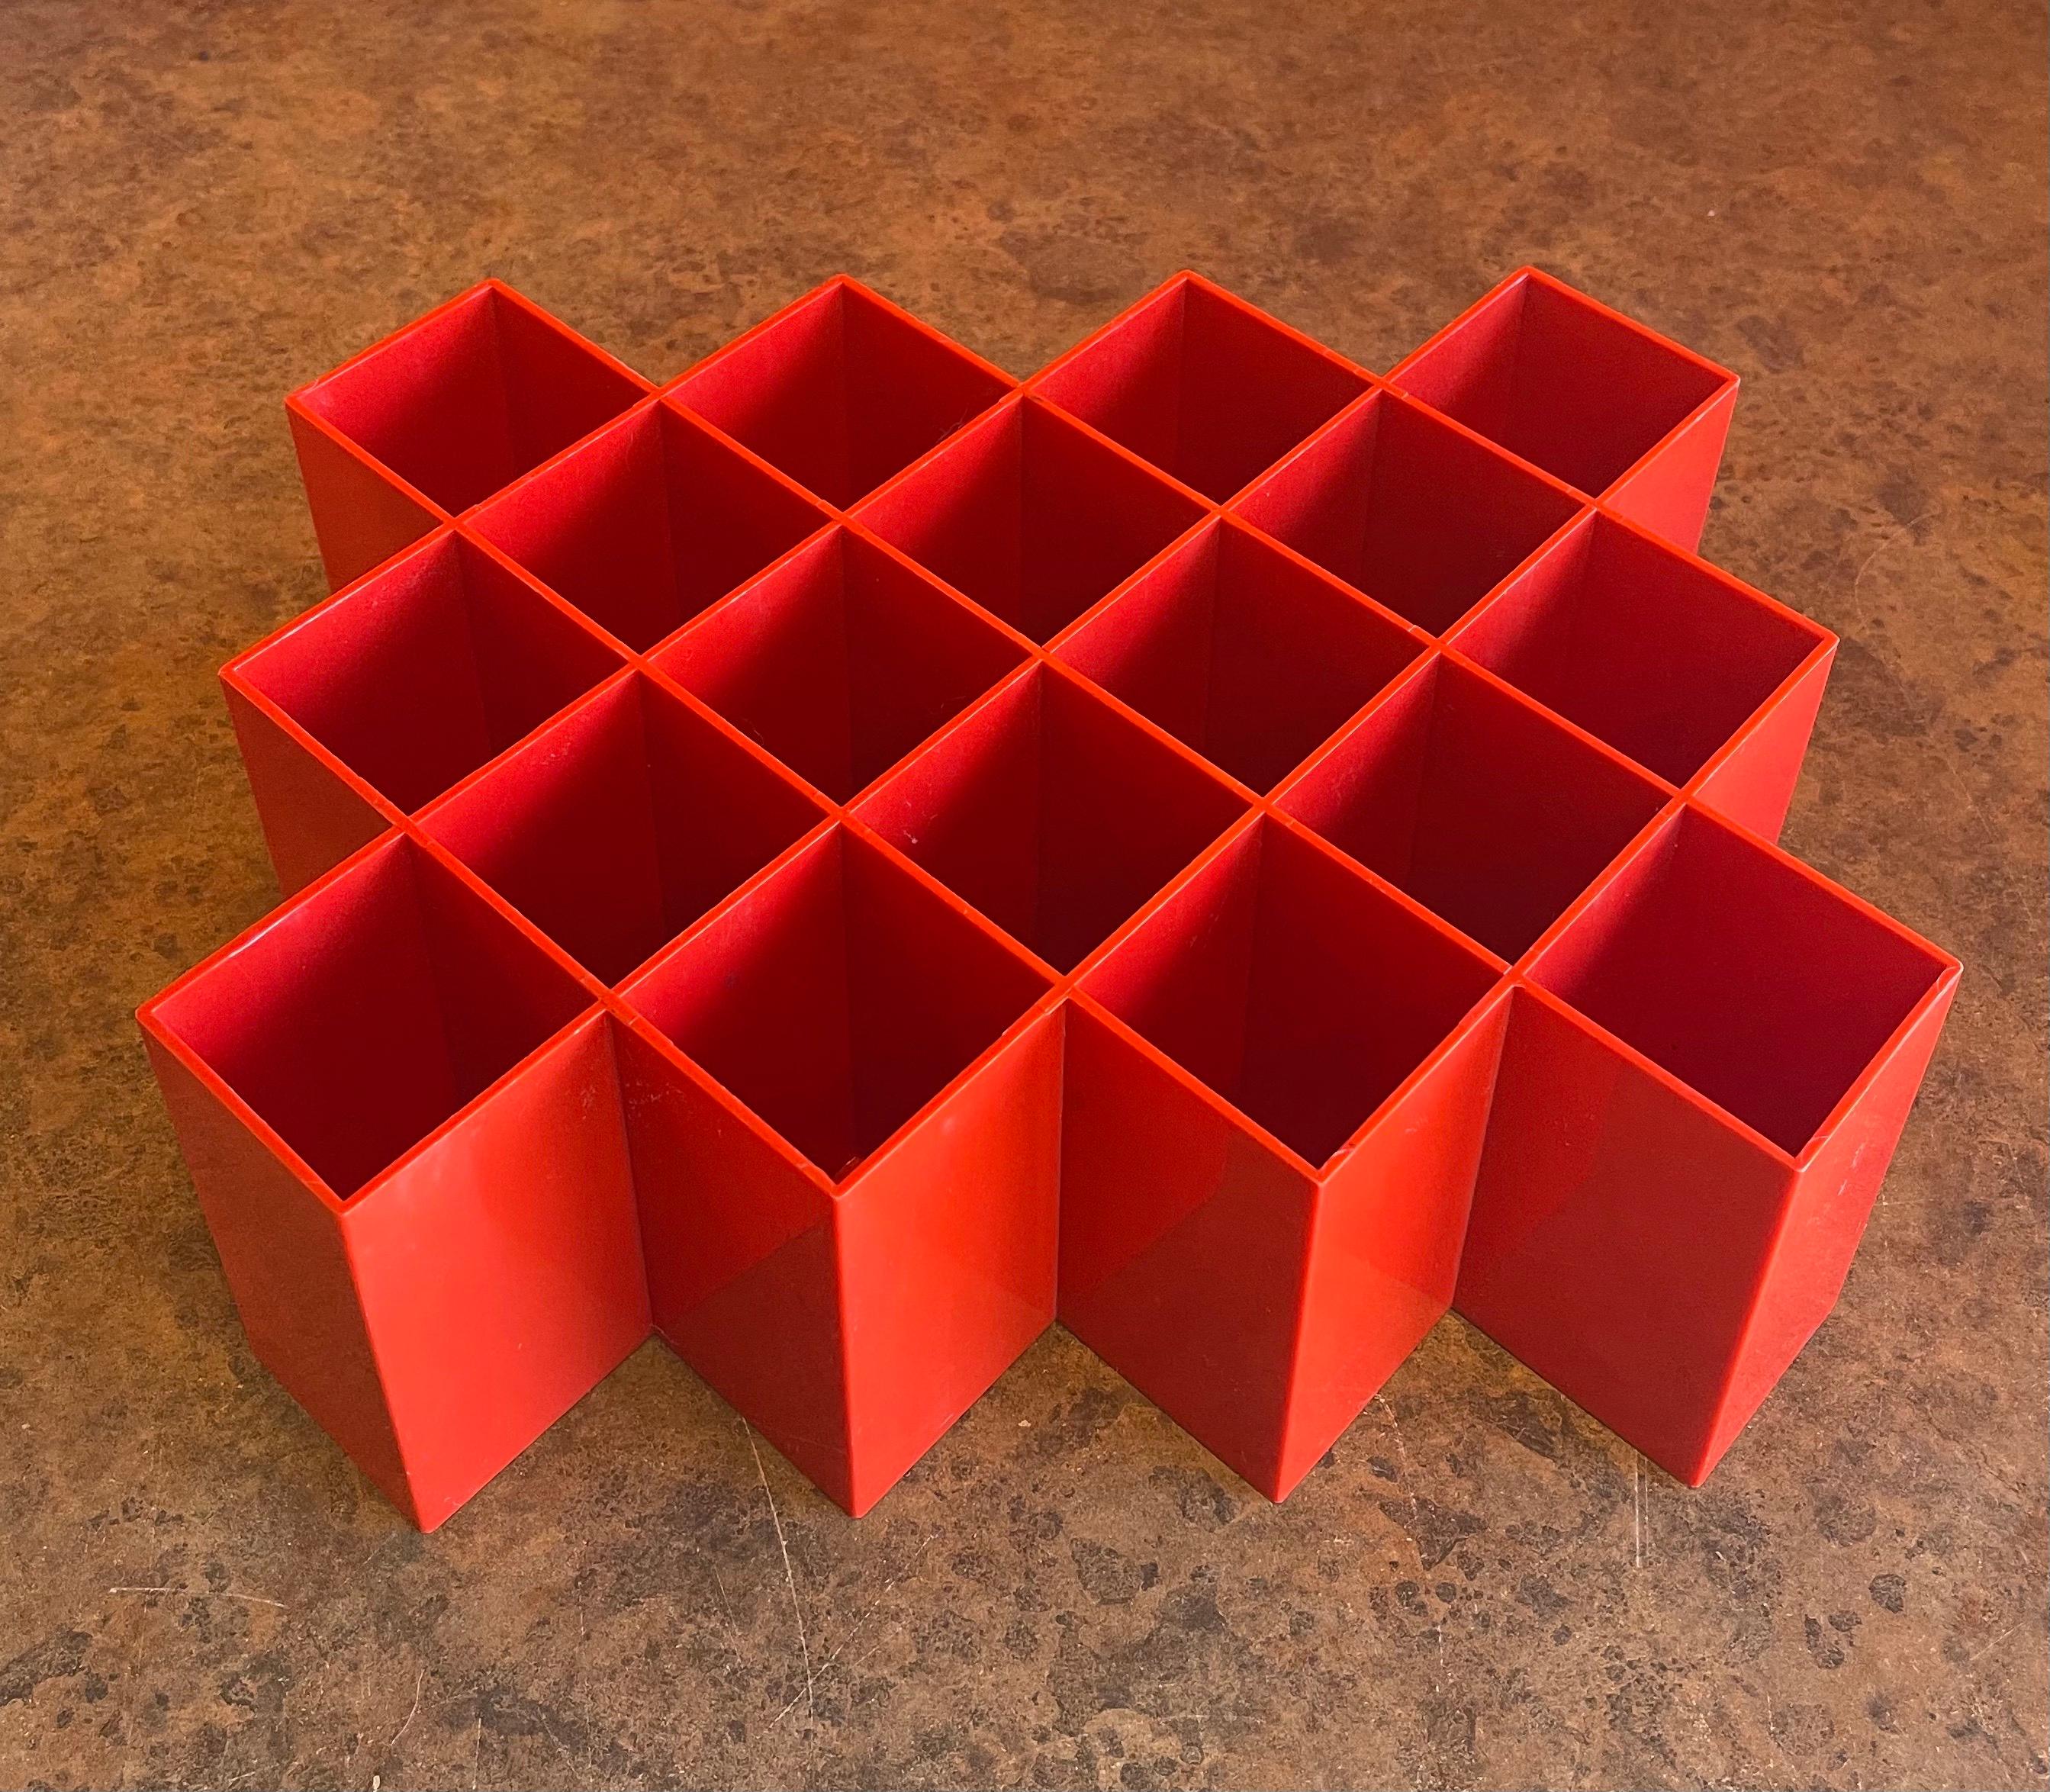 A very cool postmodern / memphis design hanging spice rack by Copco, circa 1980s. The piece is in very good vintage condition and is made of molded, bright red plastic. It measures 11.5